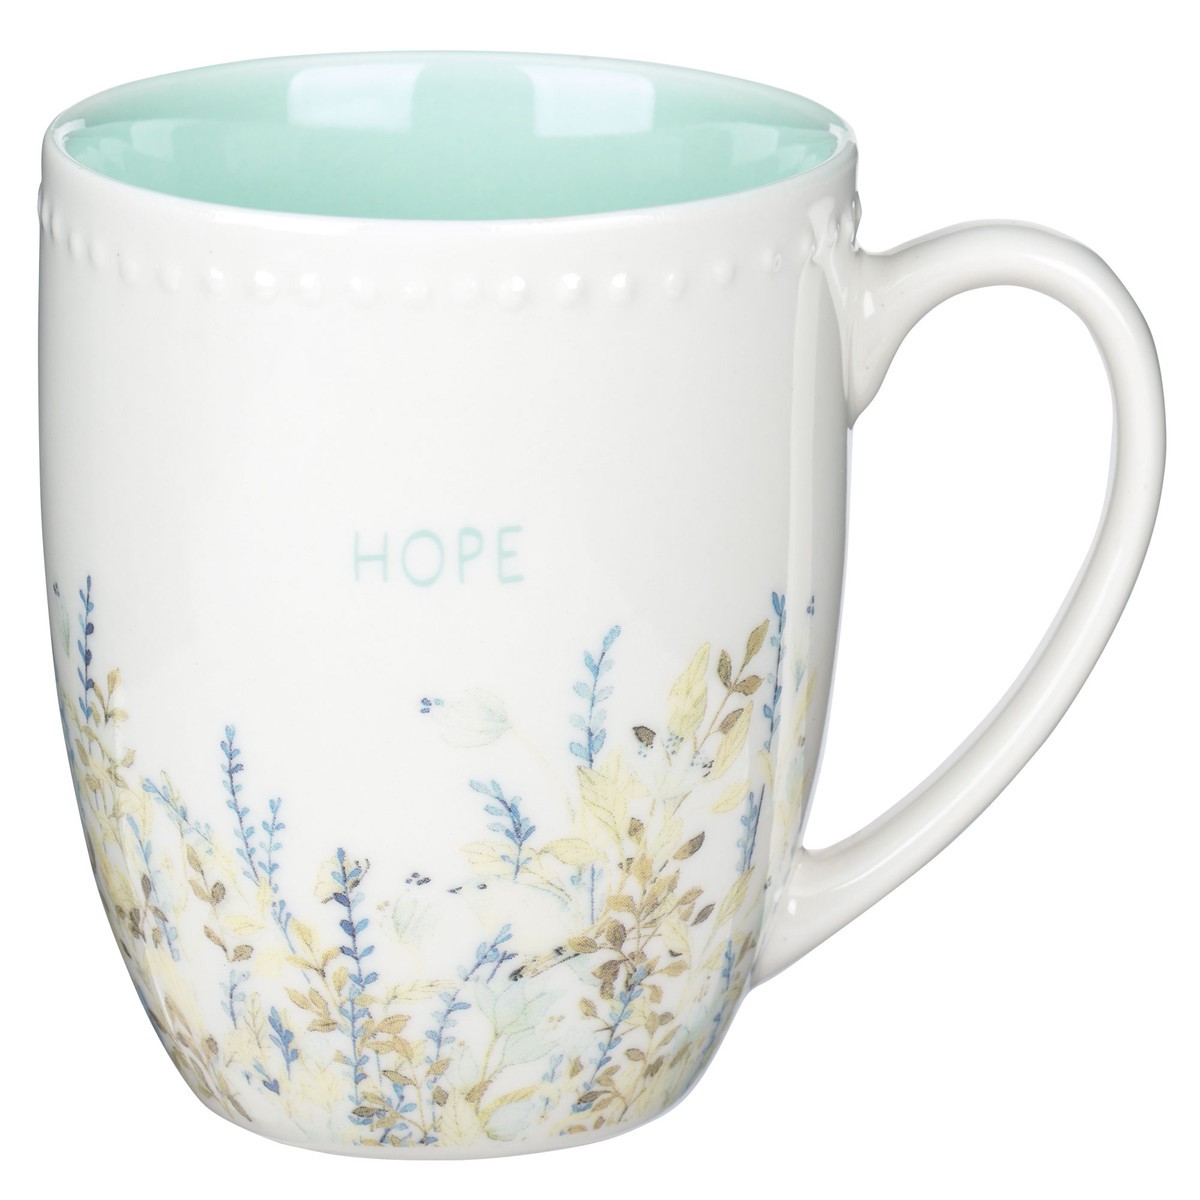 Hope Inscribed White Ceramic Floral Designed Coffee Mug  with Mint Colored Interior